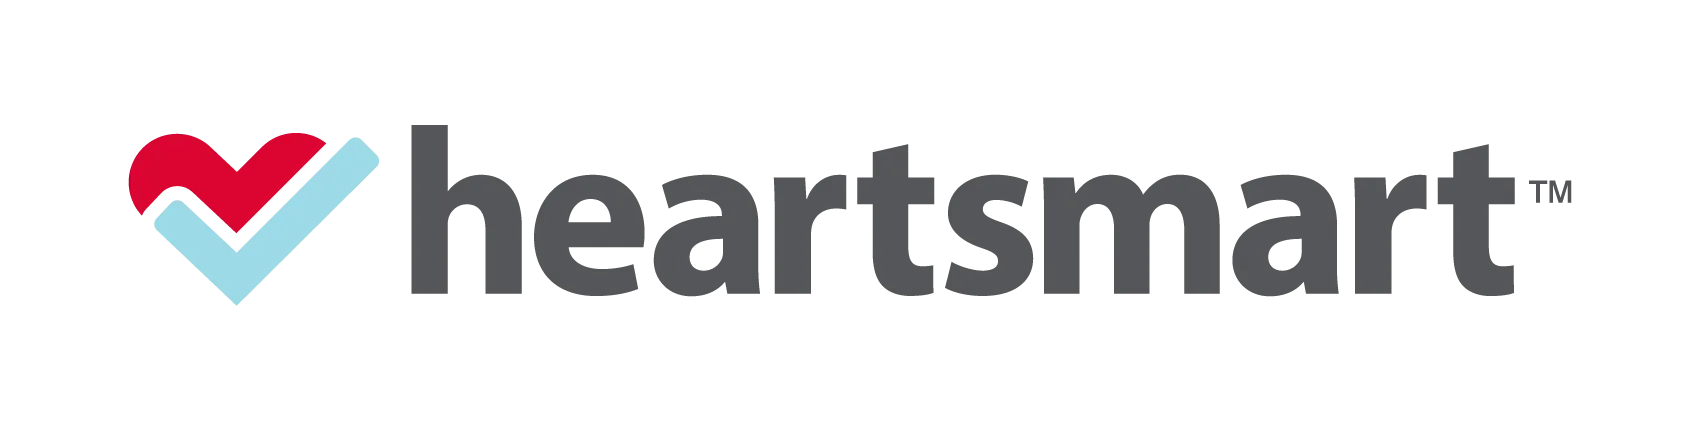 Heartsmart coupon codes, promo codes and deals